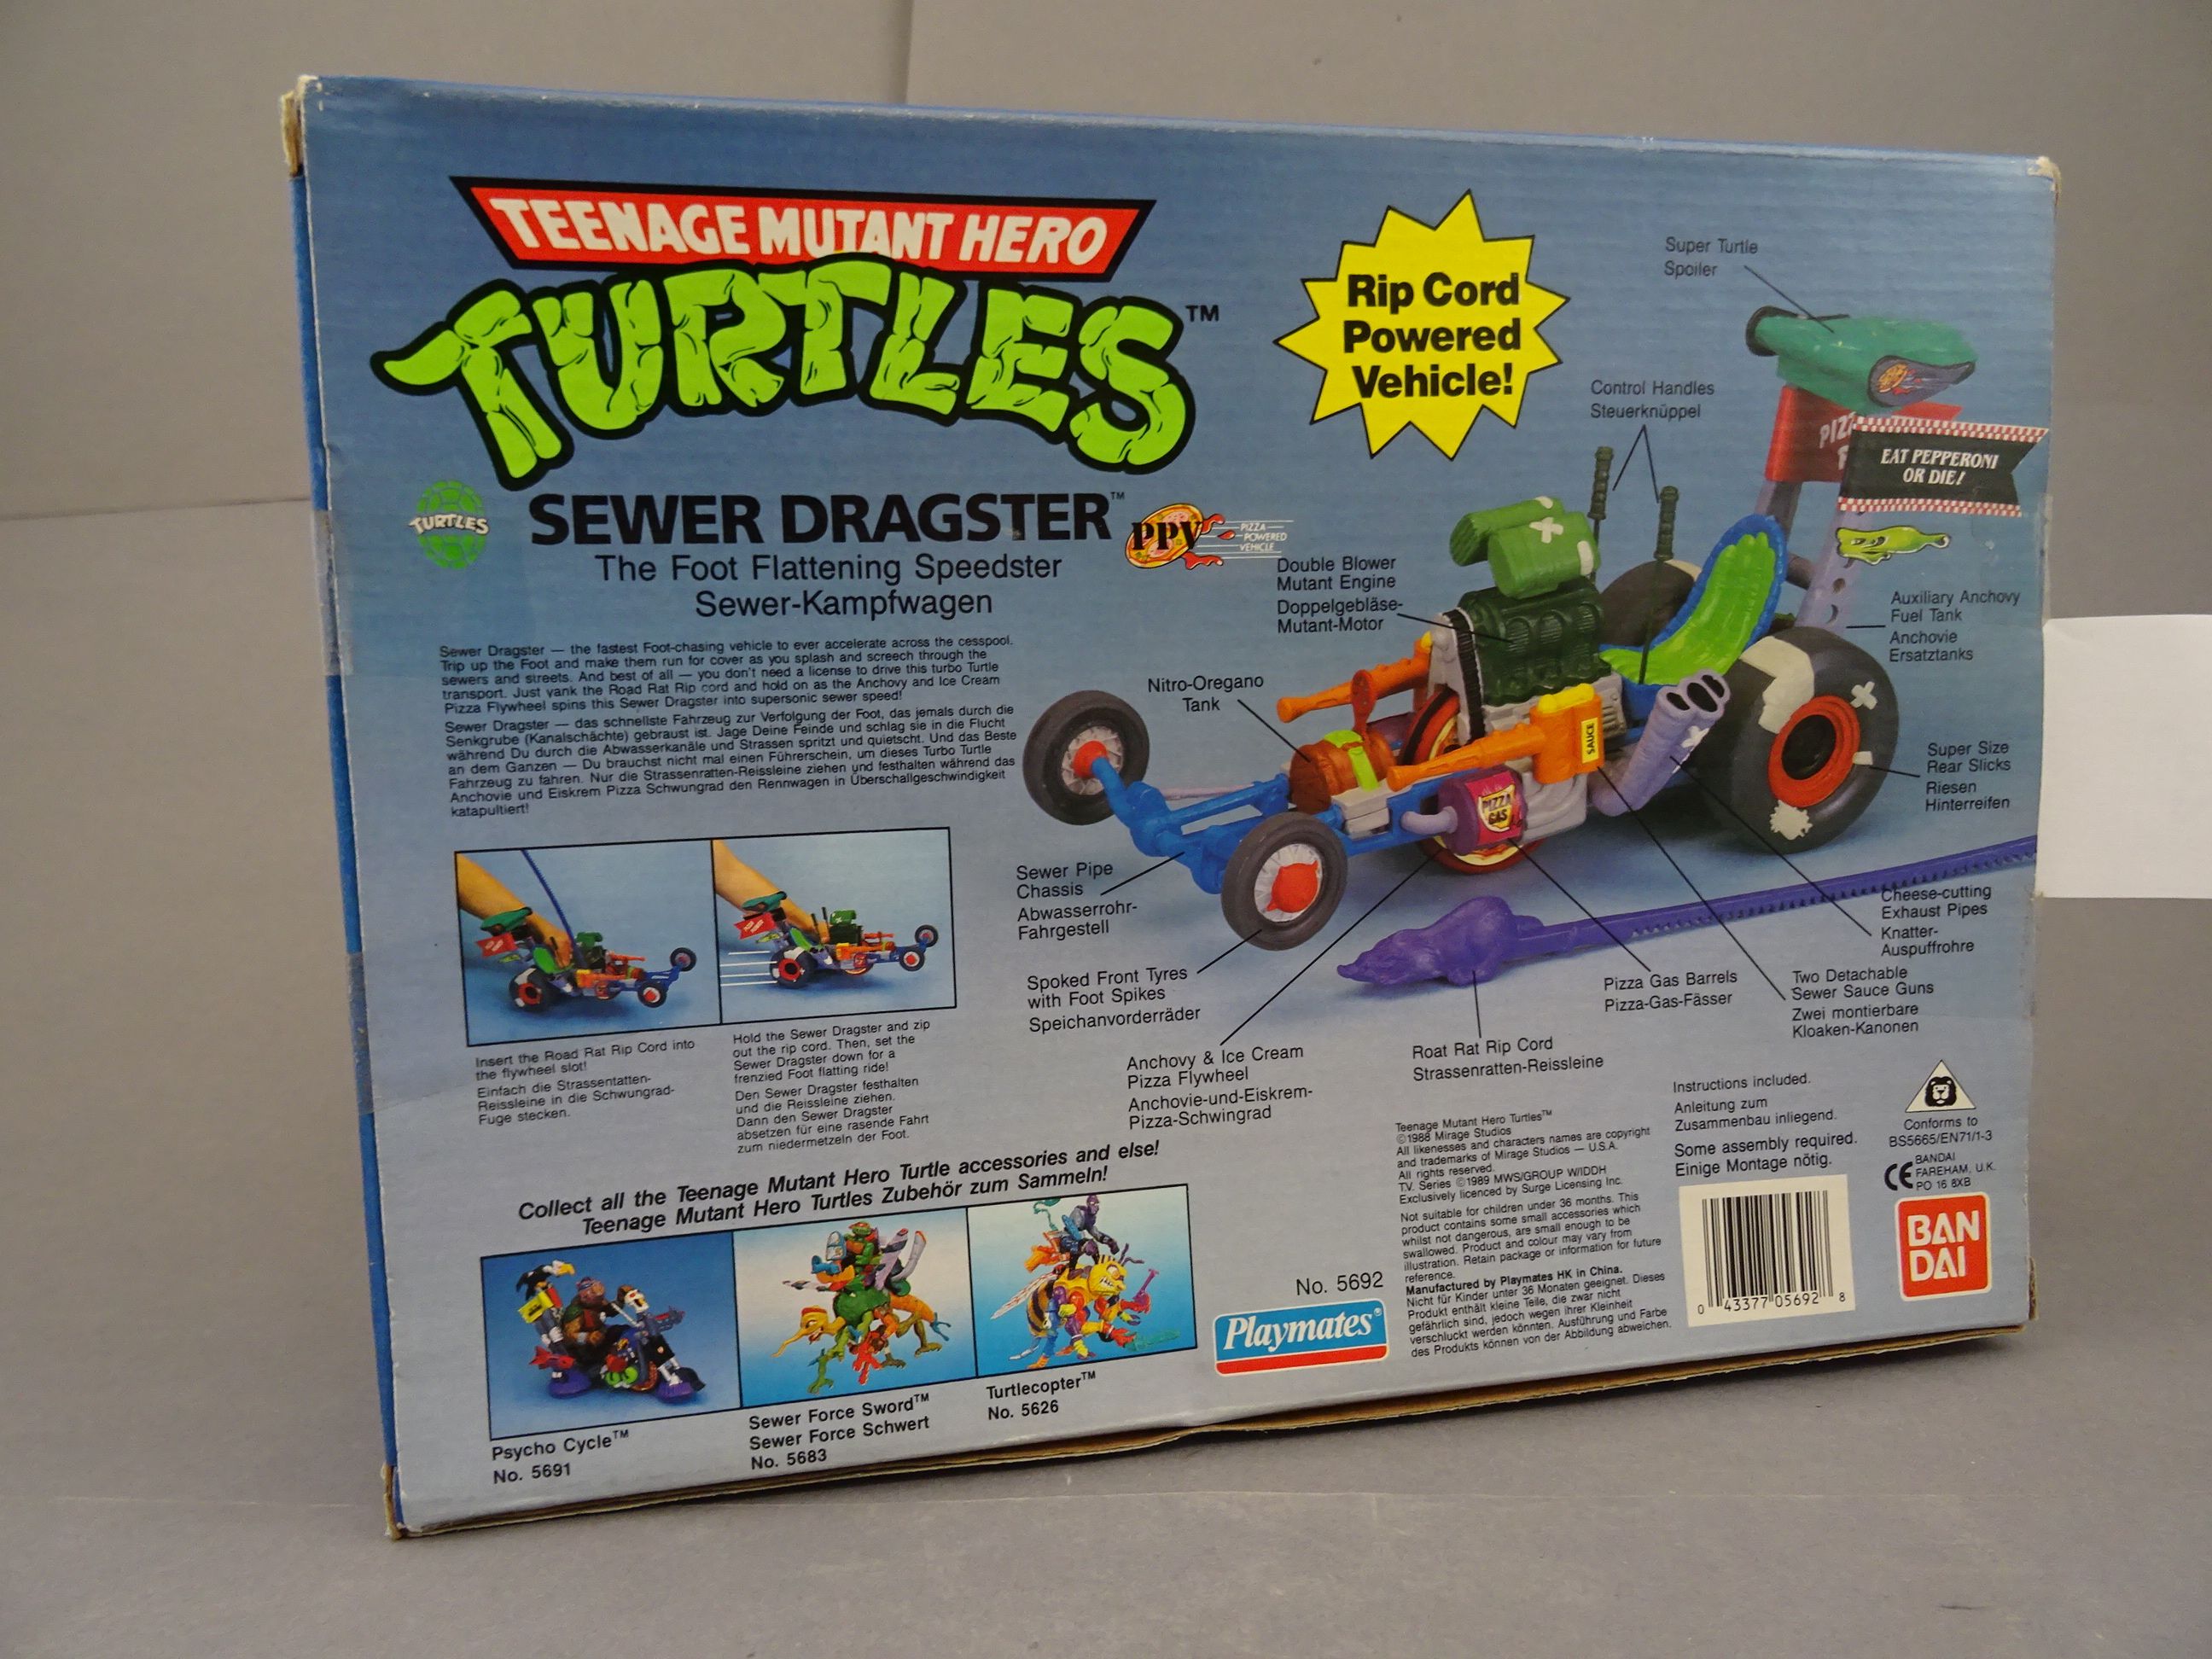 Original boxed Playmates Bandai Teenage Mutant Hero Turtles Sewer Dragster vehicle, appears to be - Image 3 of 3